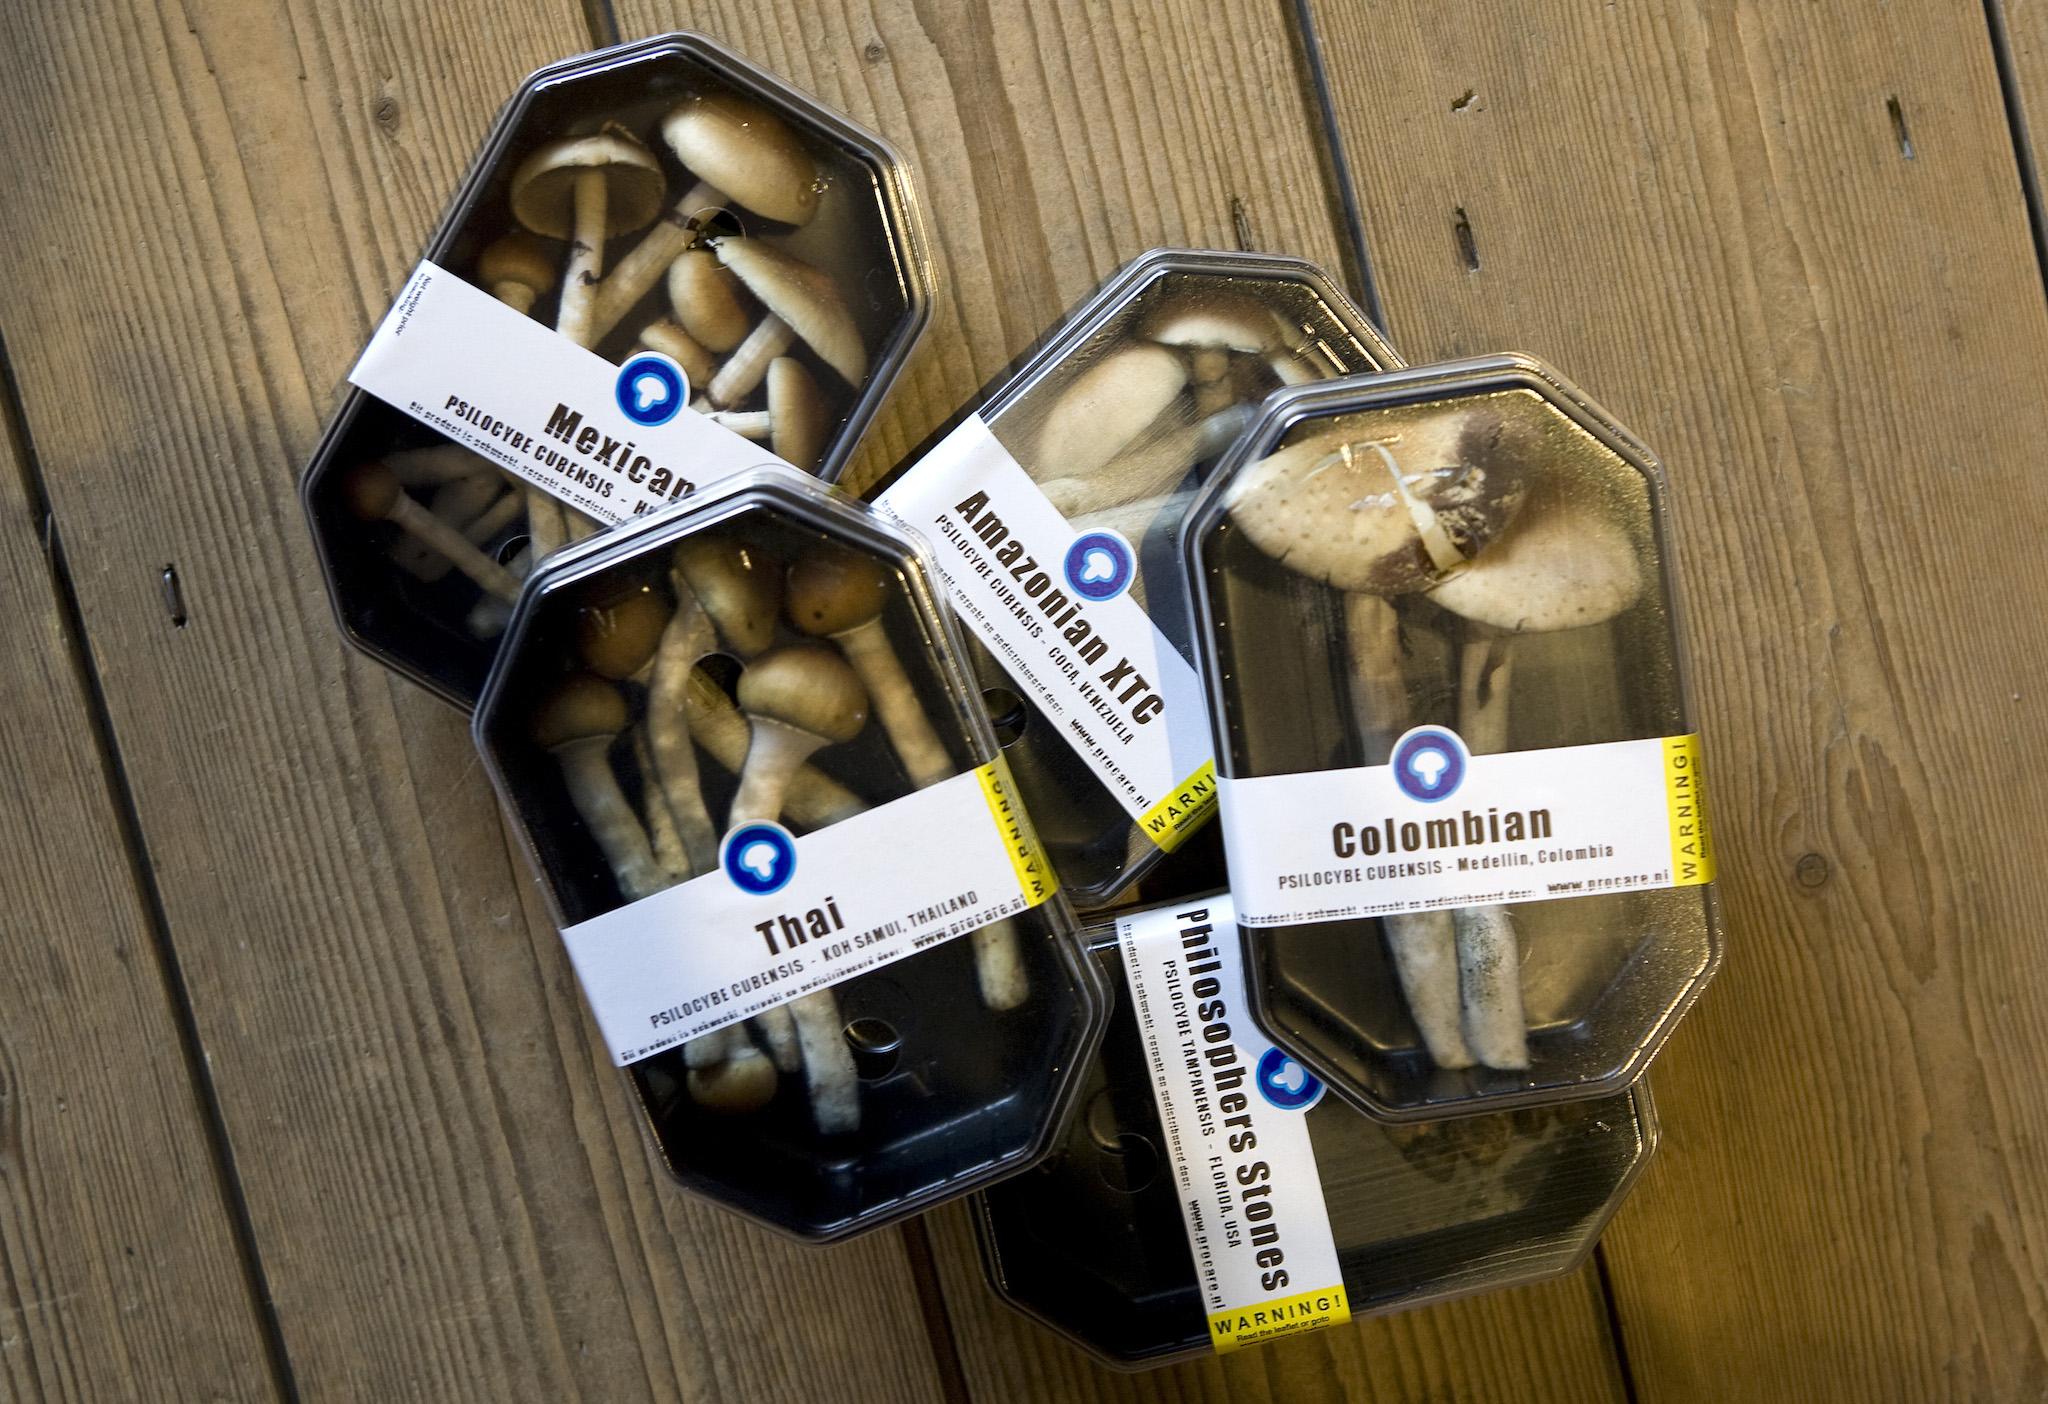 Boxes containing magic mushrooms are displayed at a coffee and smart shop in Rotterdam